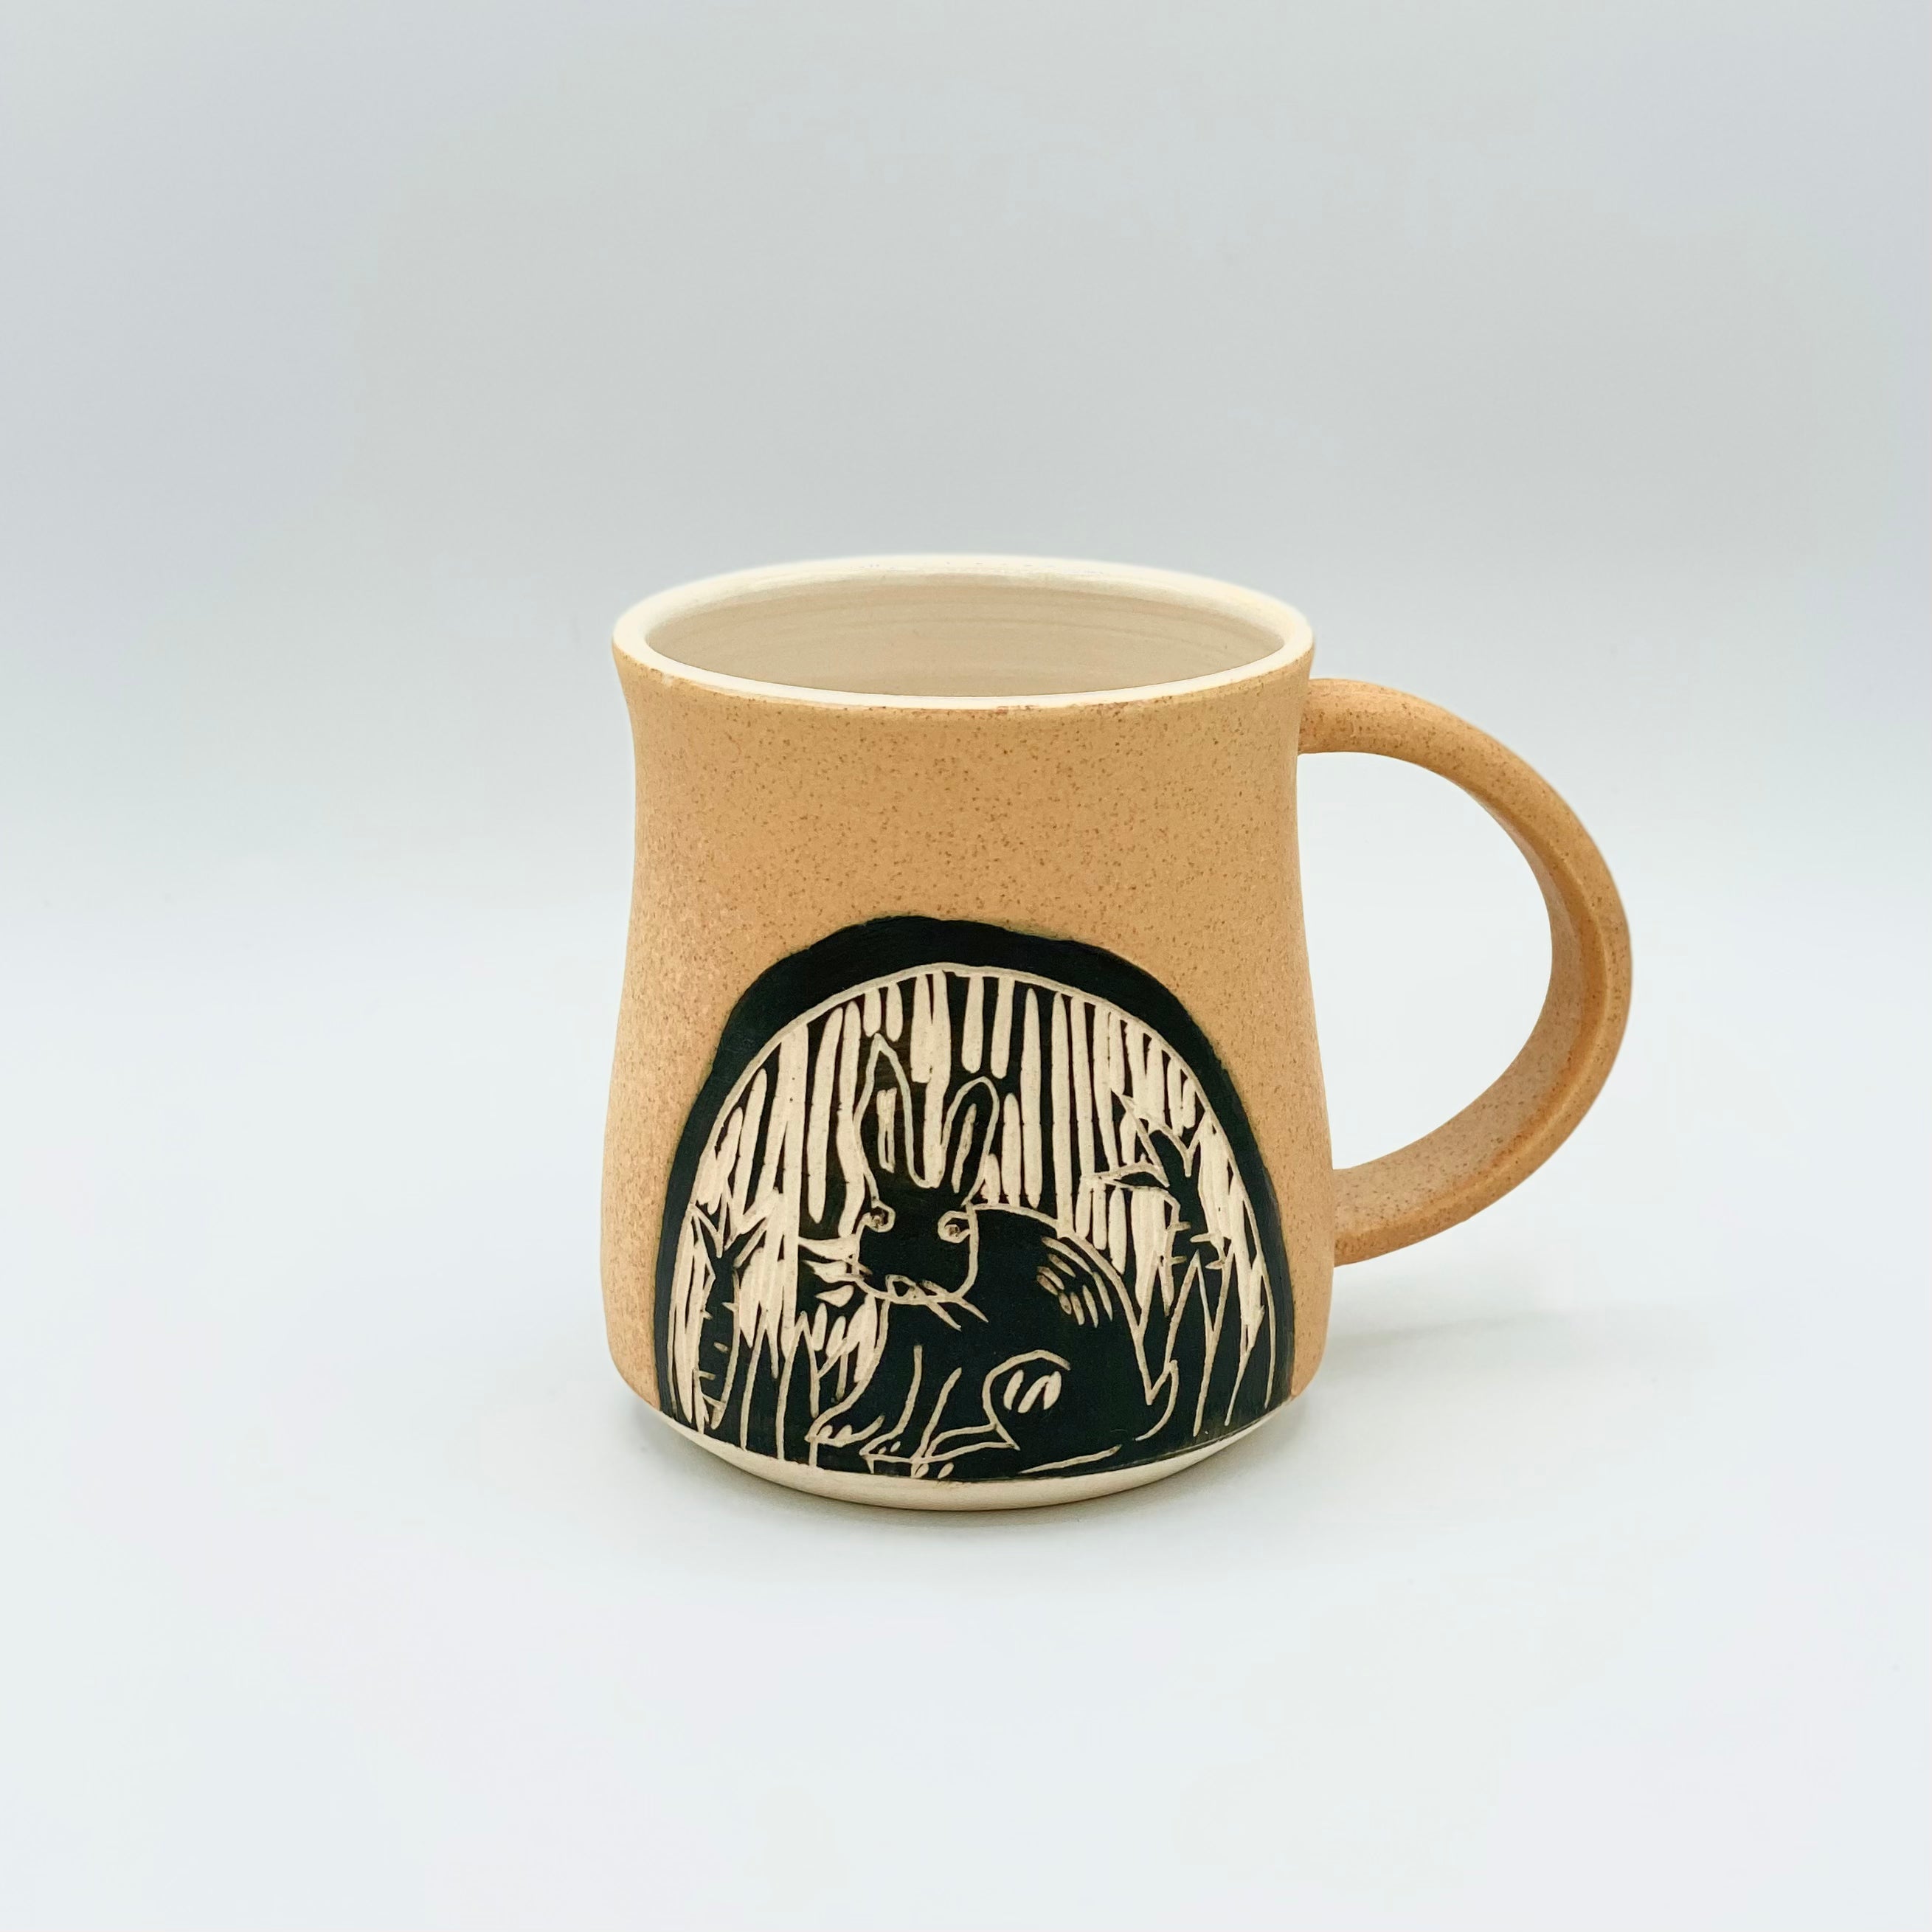 Aesop’s Fables Mug by Maru Pottery